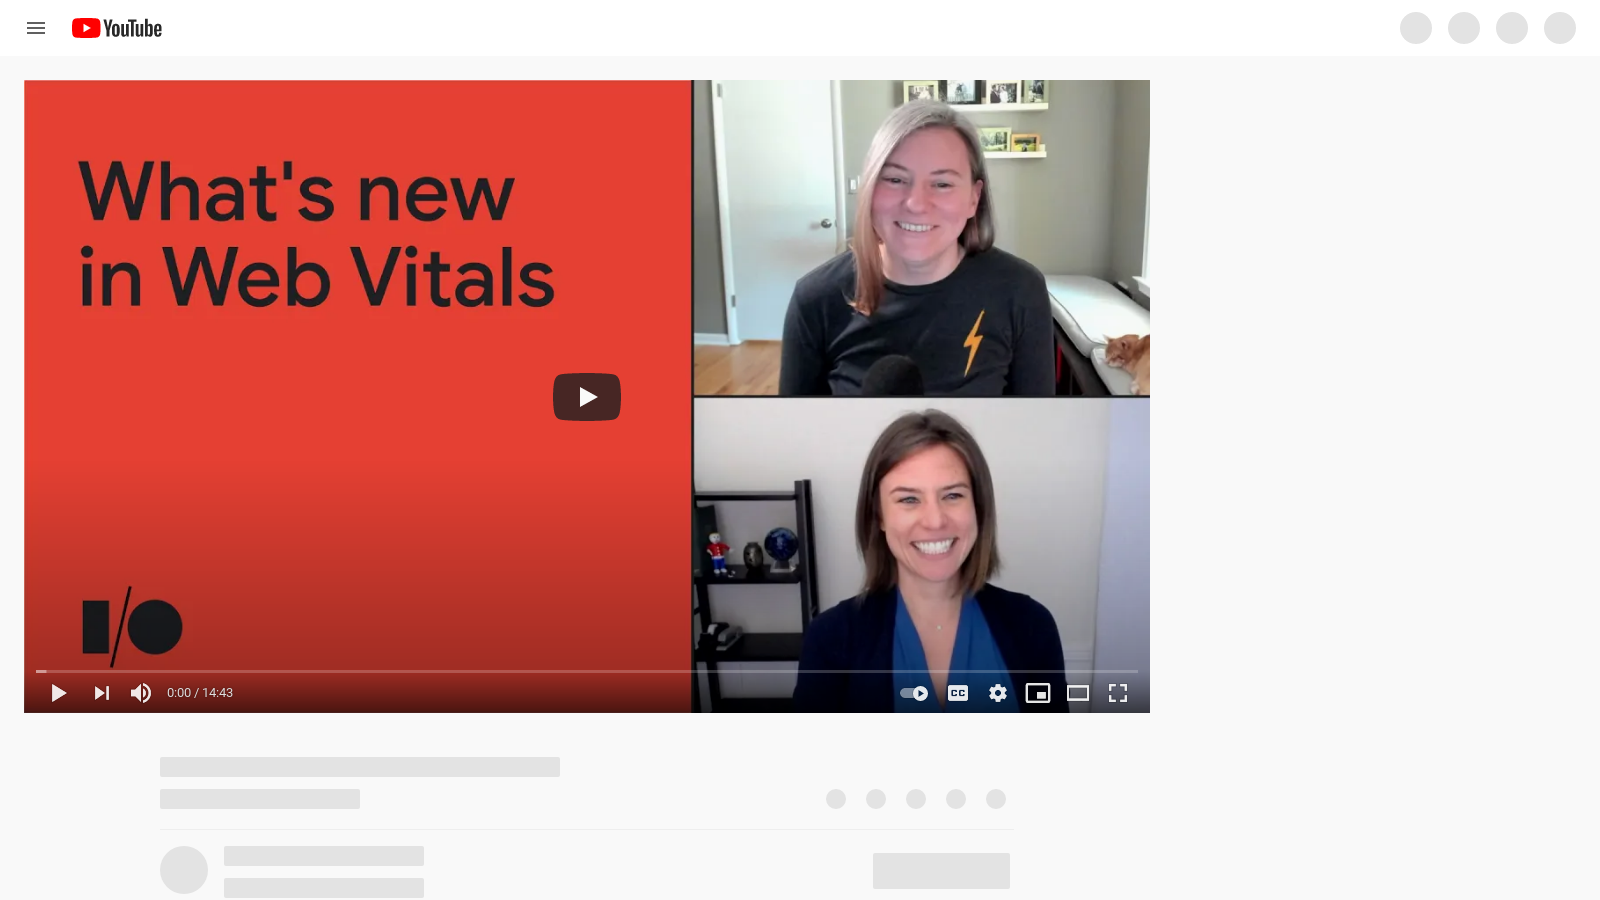 What’s new in Web Vitals